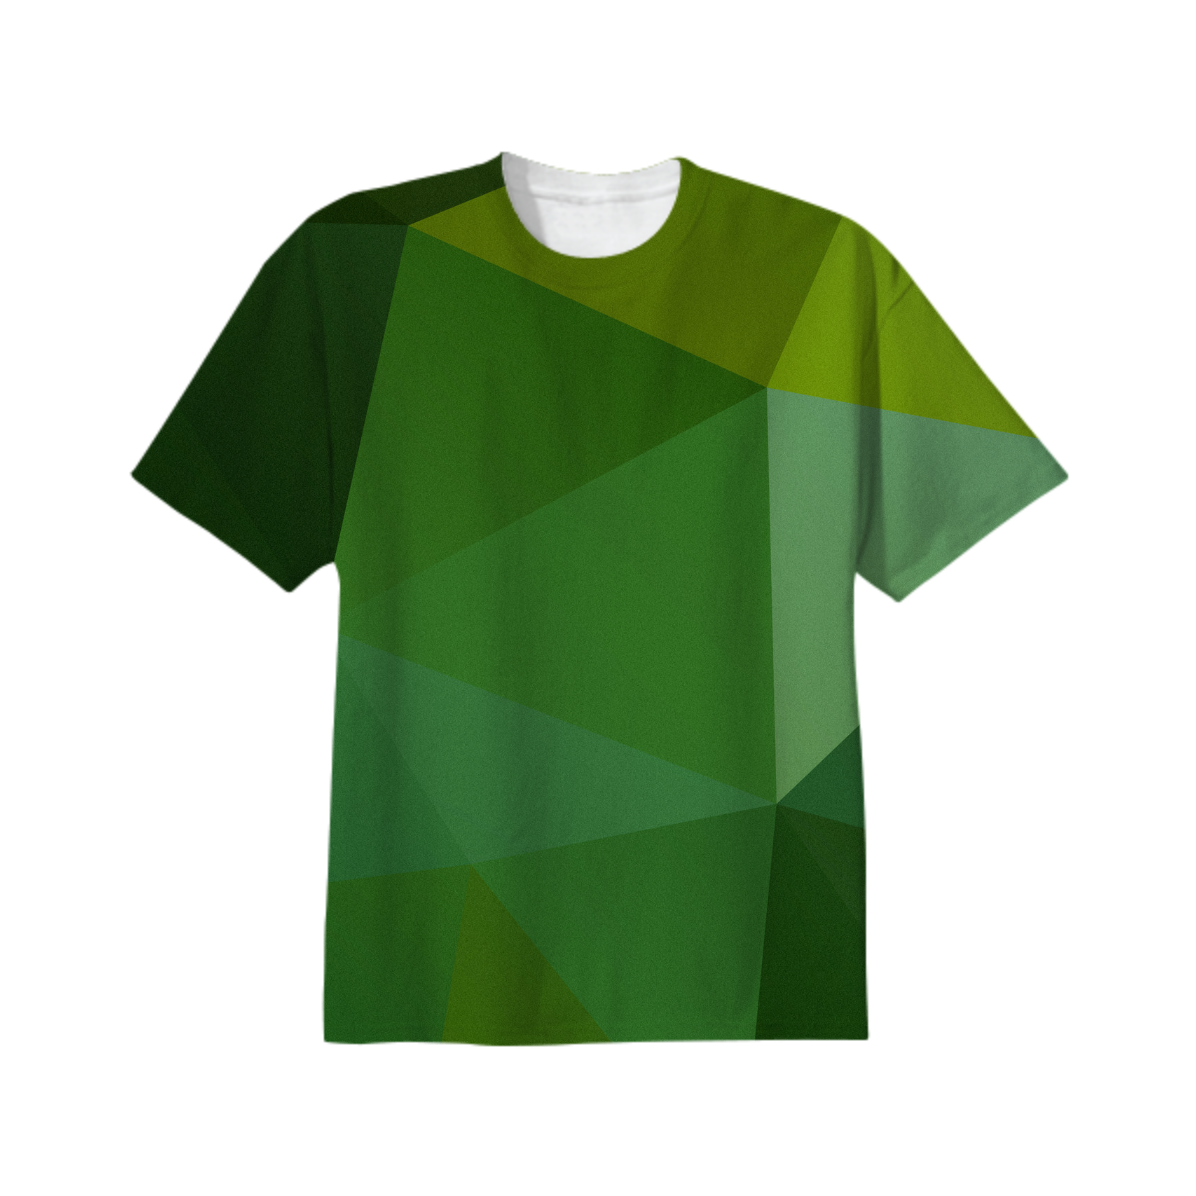 Shop Green Geometric Lovely Abstract Geometry T-Shirt Design All Over ...